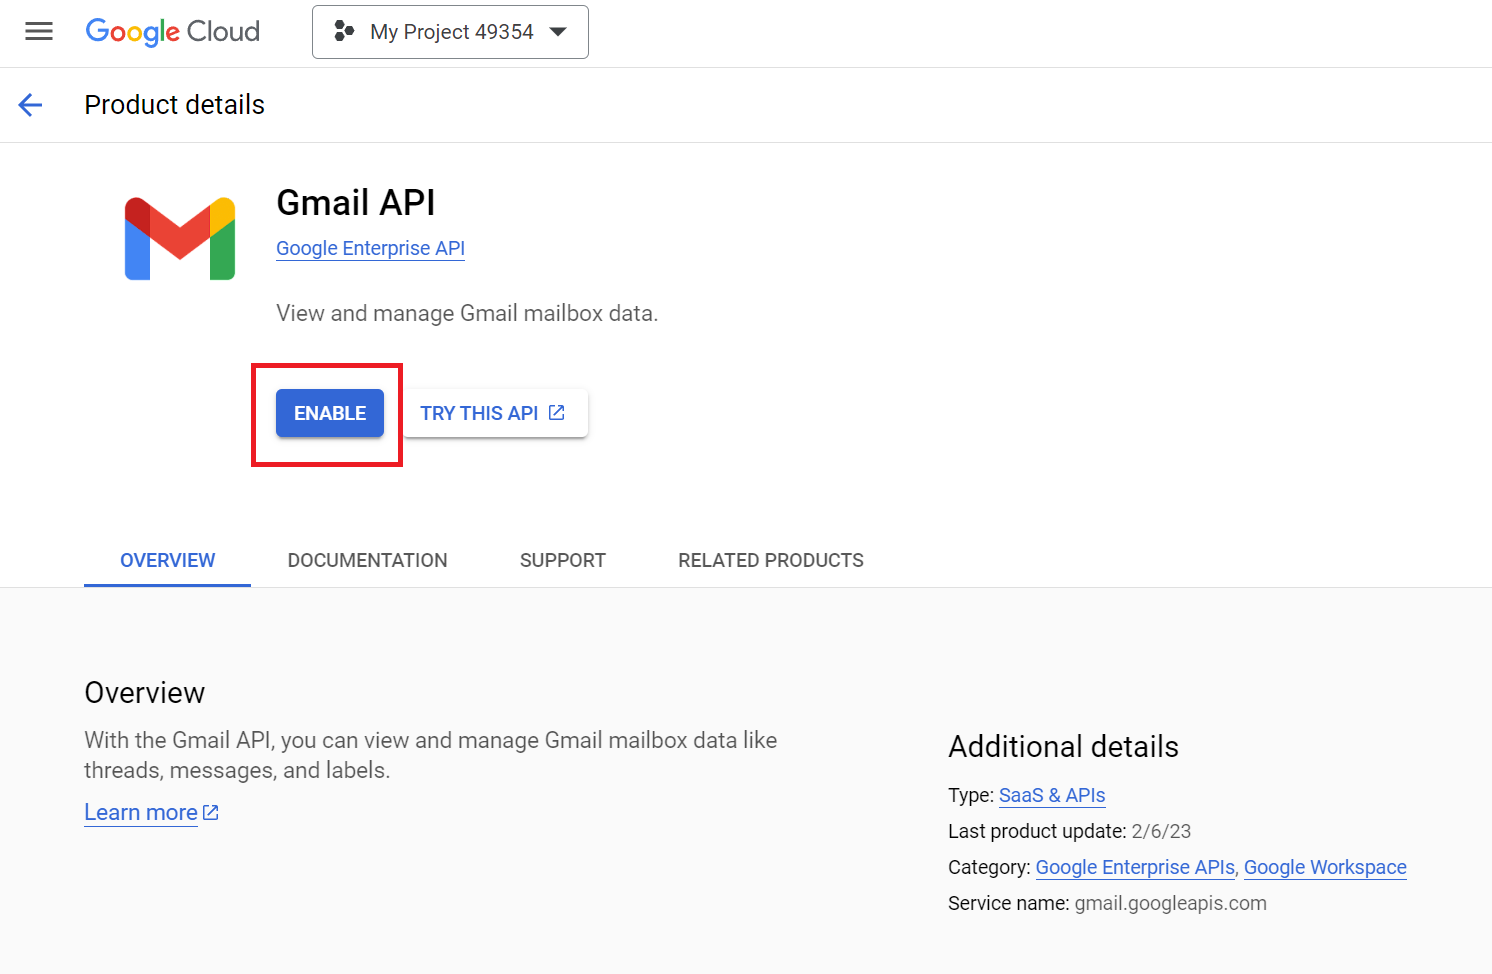 Enabling Gmail API in Google Developers Console